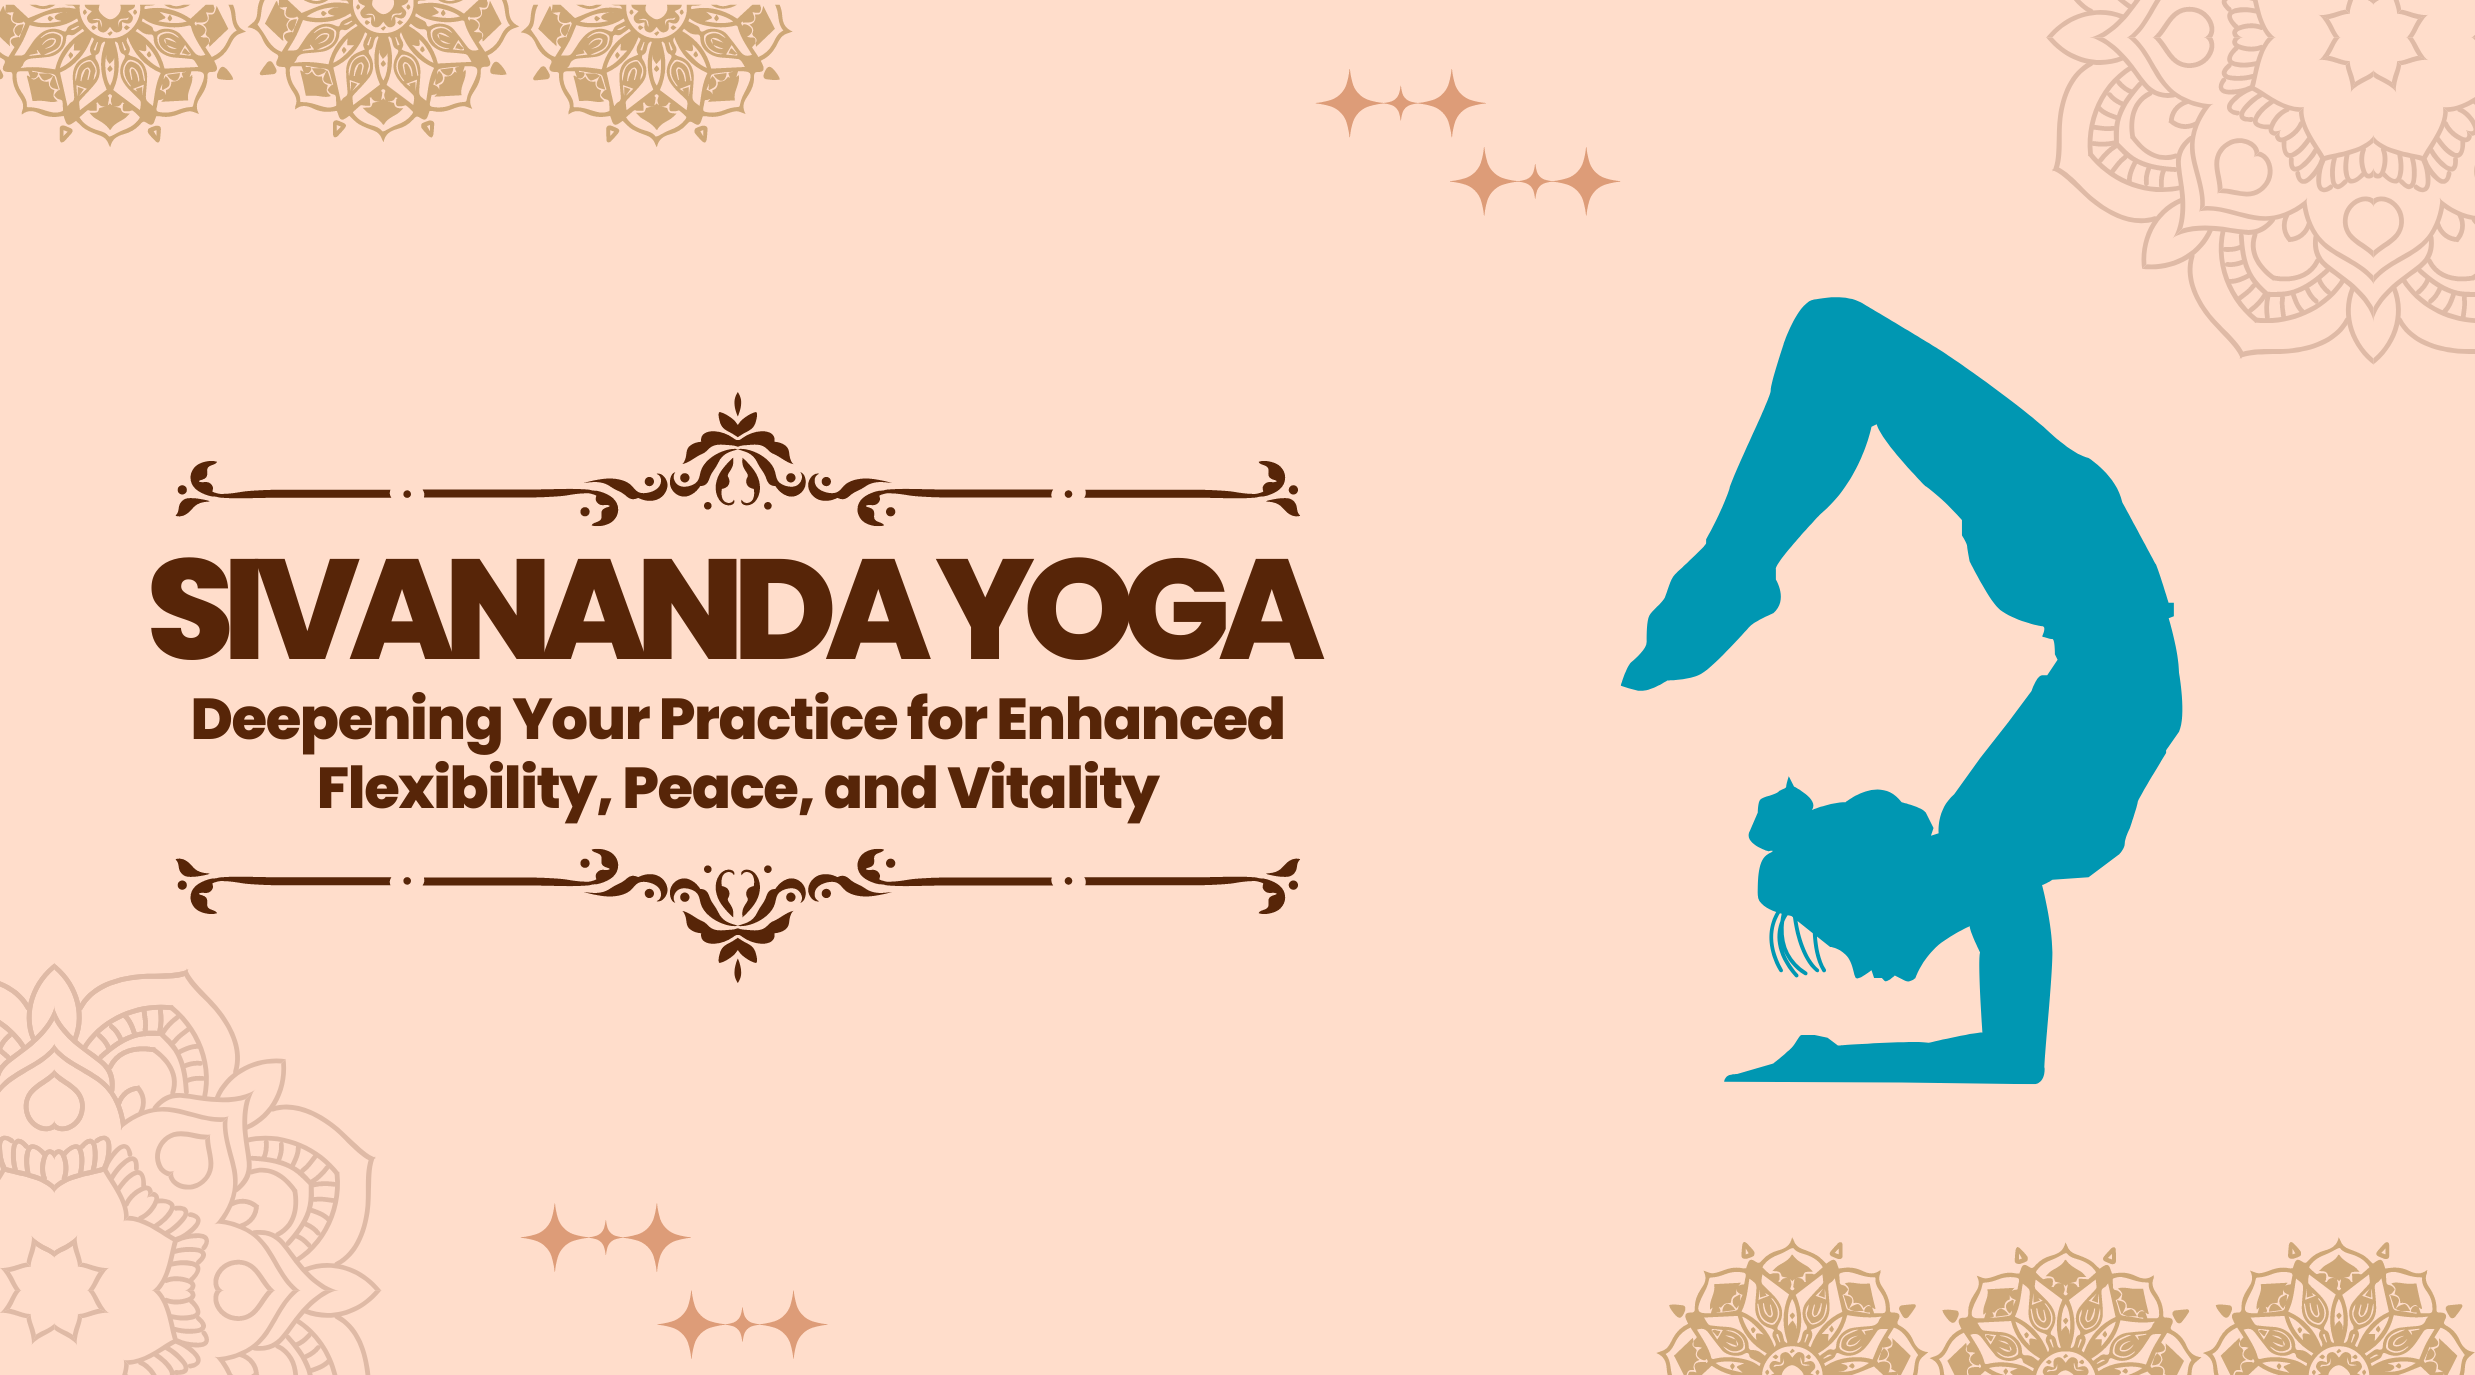 Sivananda Yoga: Deepening Your Practice for Enhanced Flexibility, Peace, and Vitality